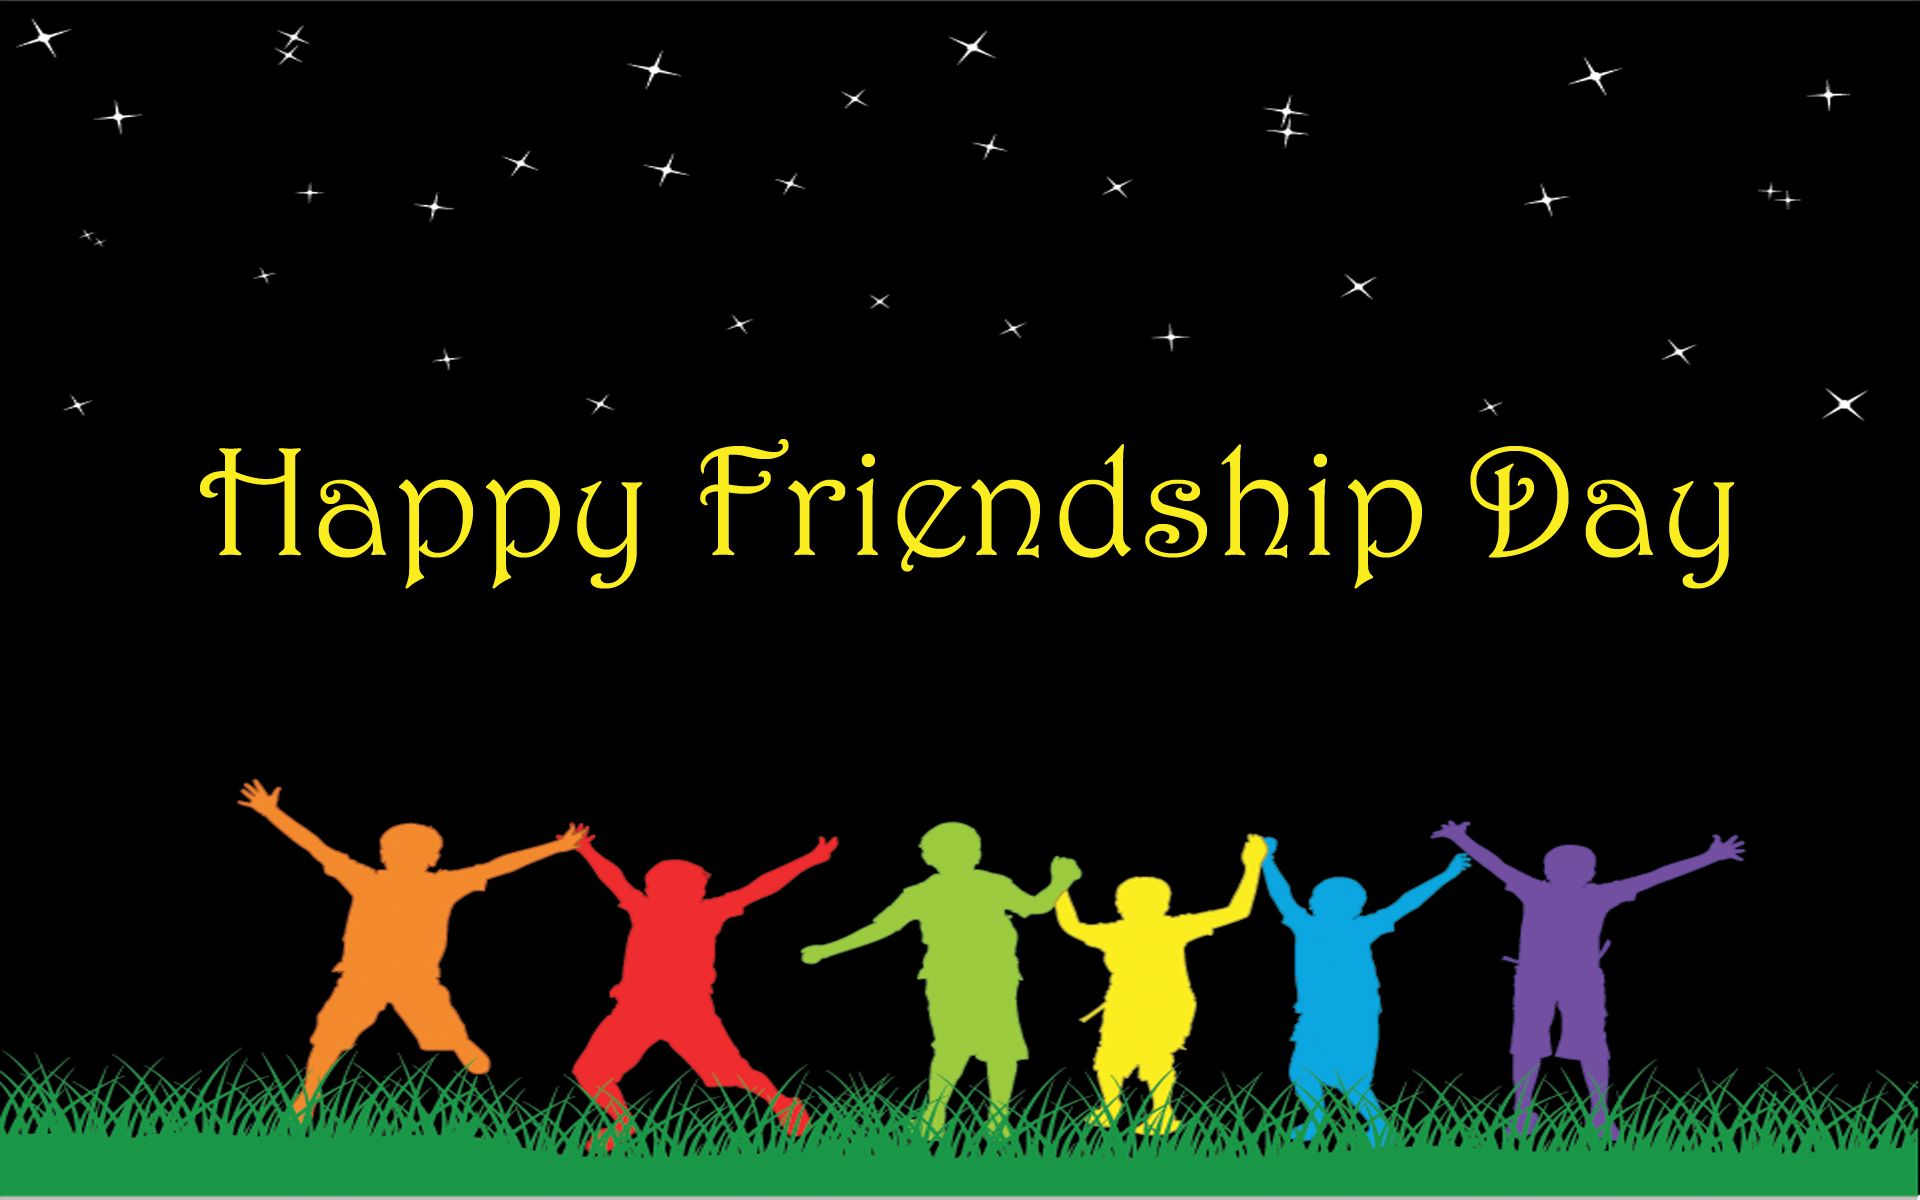 Friendship Day Background, High Definition, High Quality, Widescreen